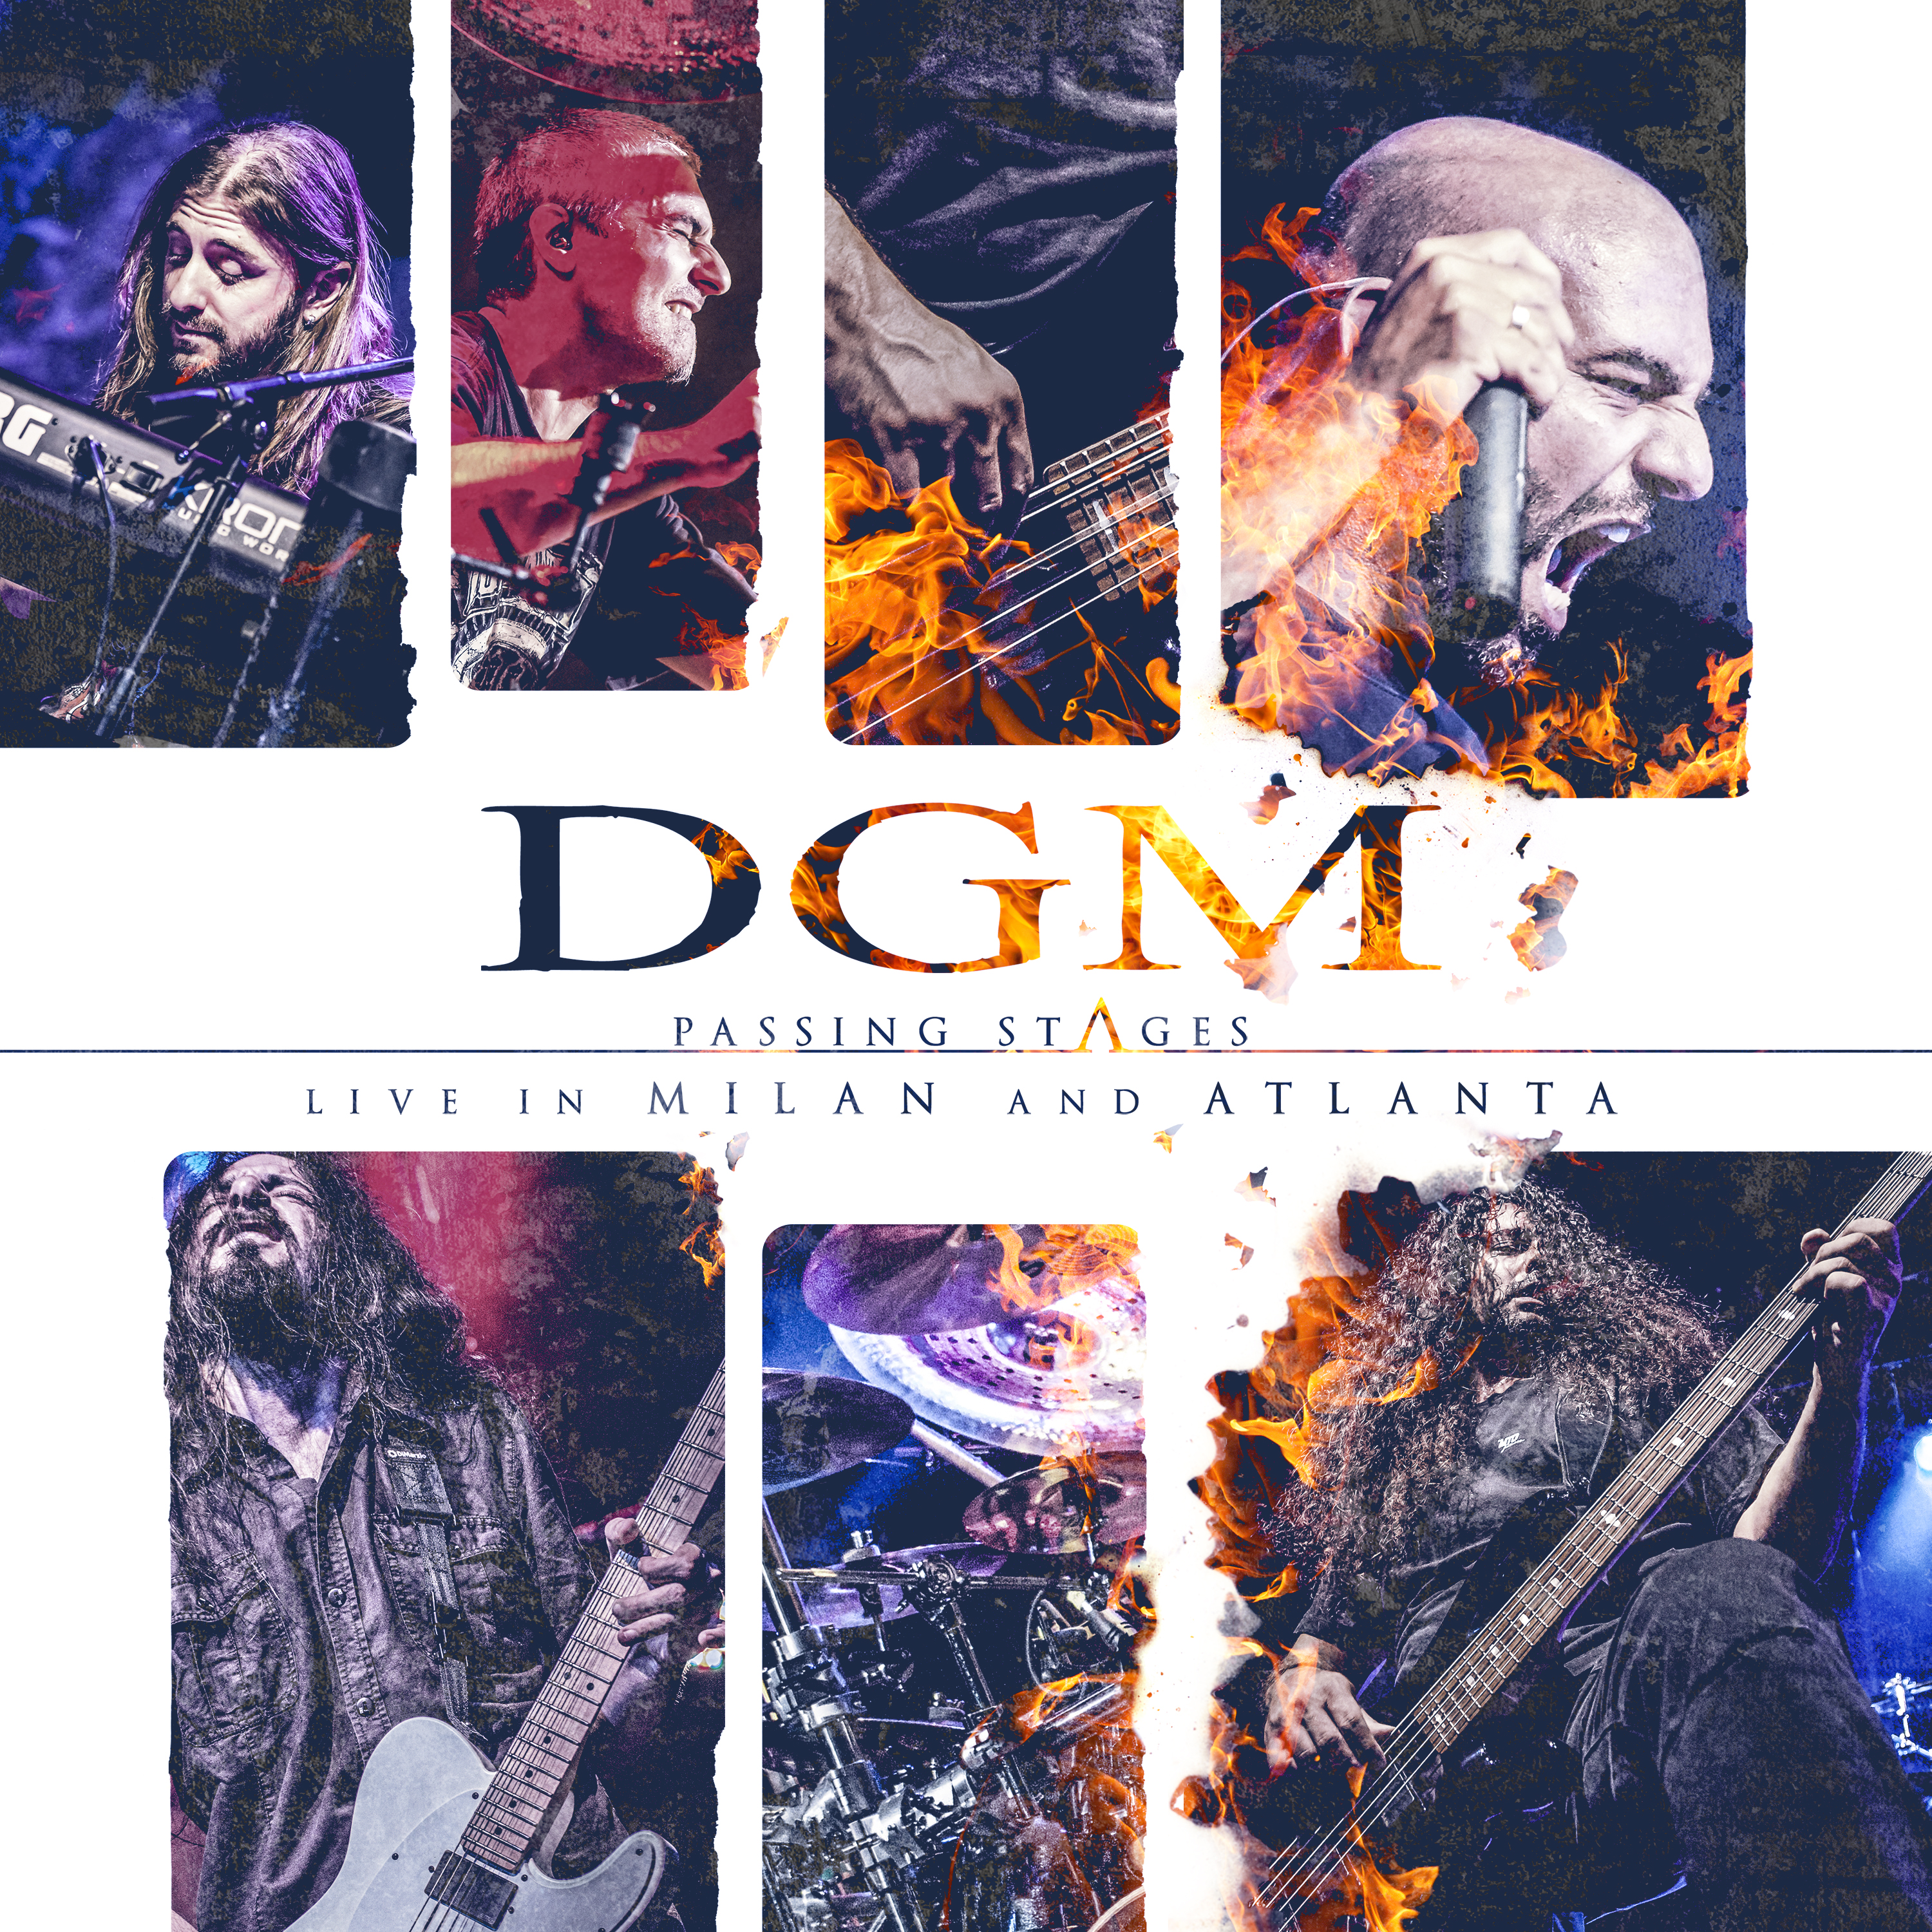 DGM – Passing Stages: Live in Milan and Atlanta